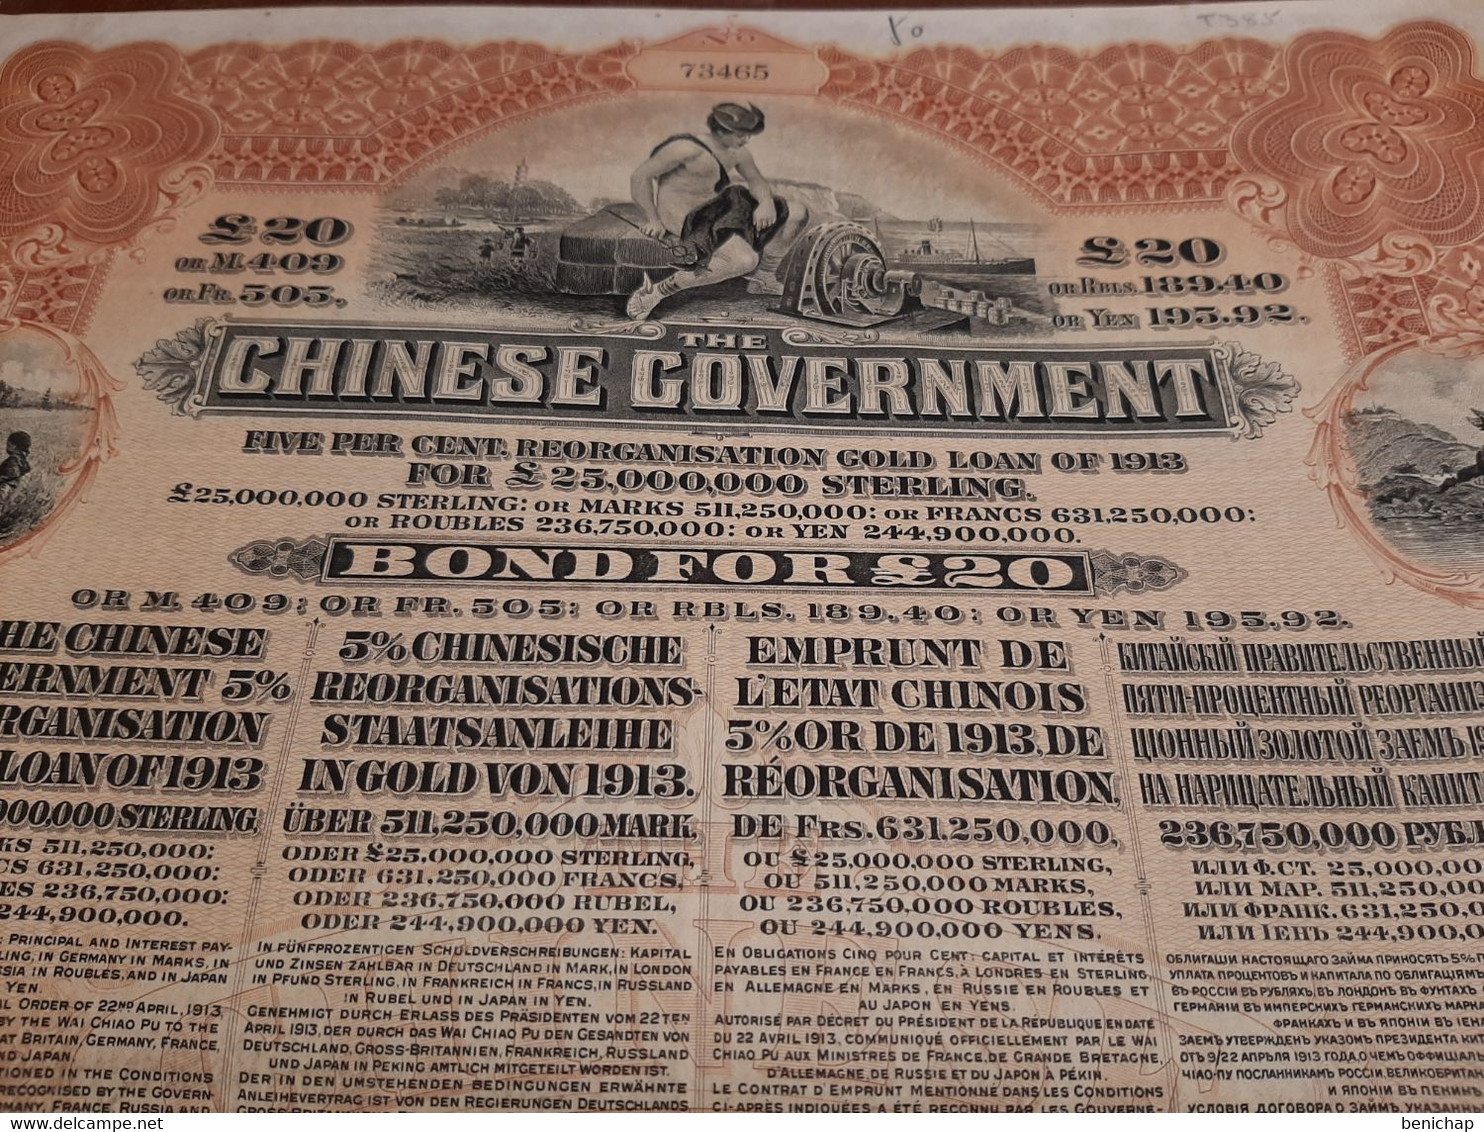 1913 - Chine - China - Chinese-Chinese Government Emprunt De L'Etat Chinois 5% - Hong Kong & Shanghai Banking In London. - Azië